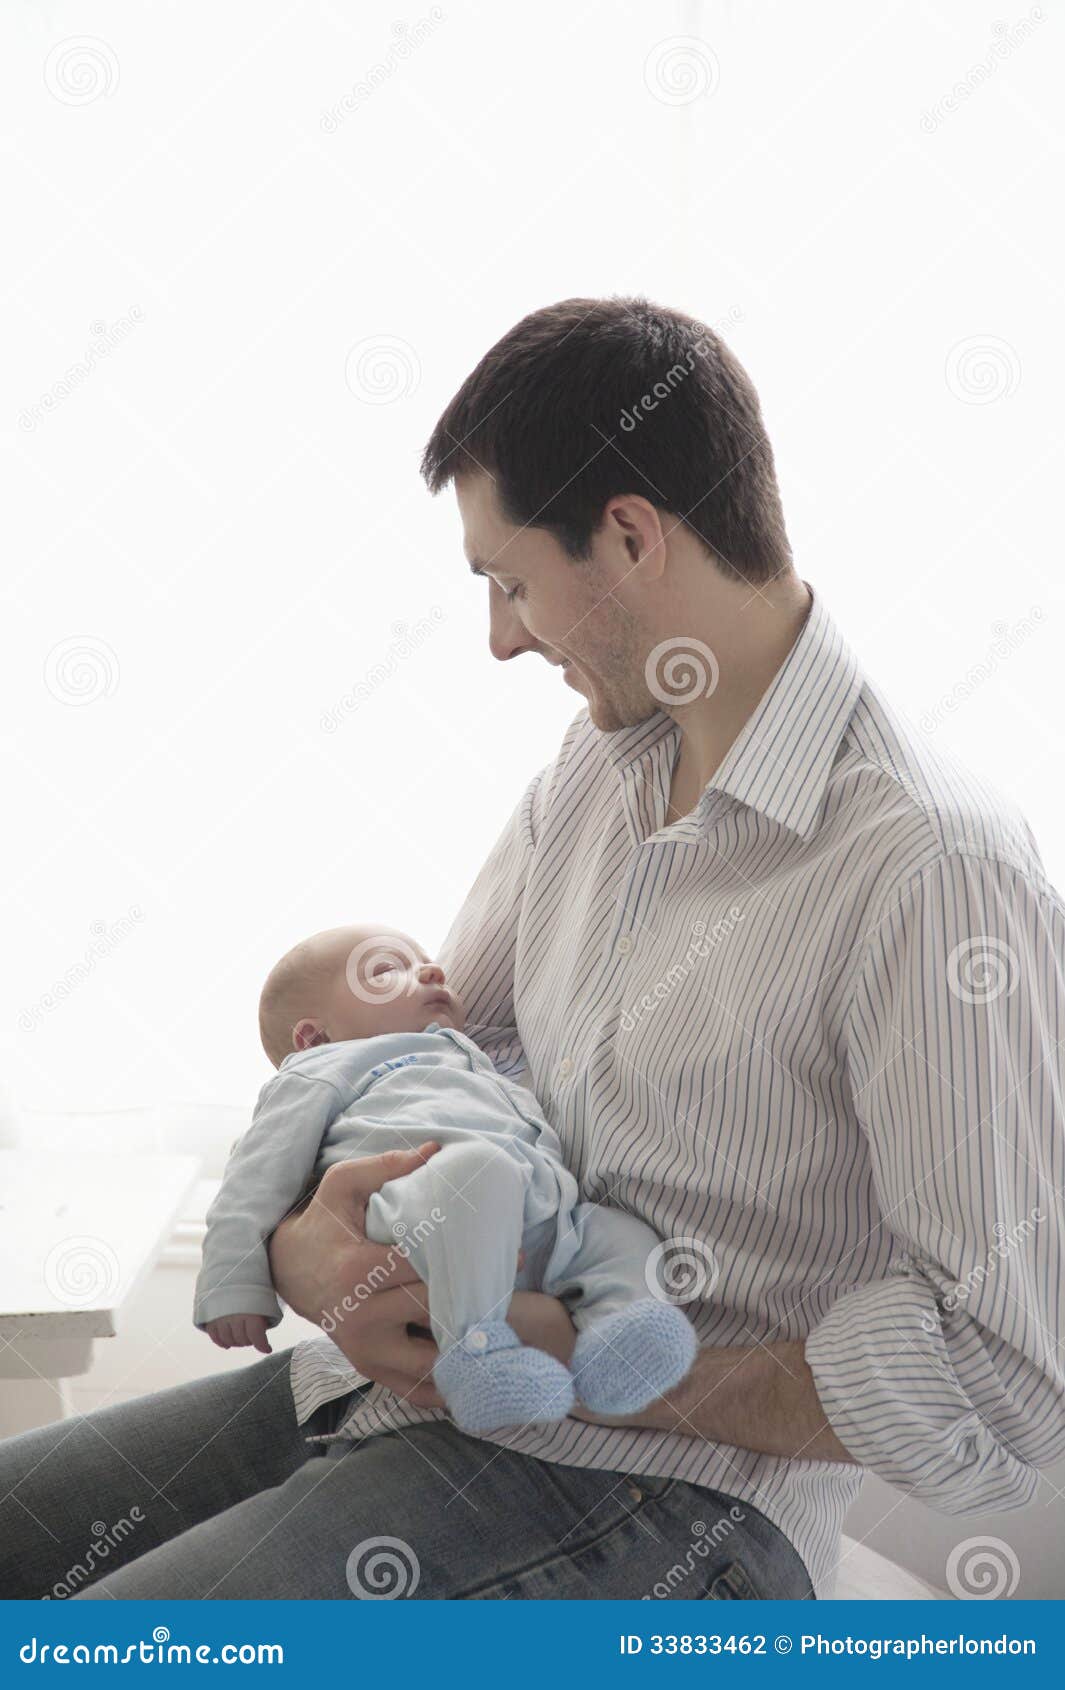 Father Holding Newborn Baby At Home Stock Photography - Image: 33833462